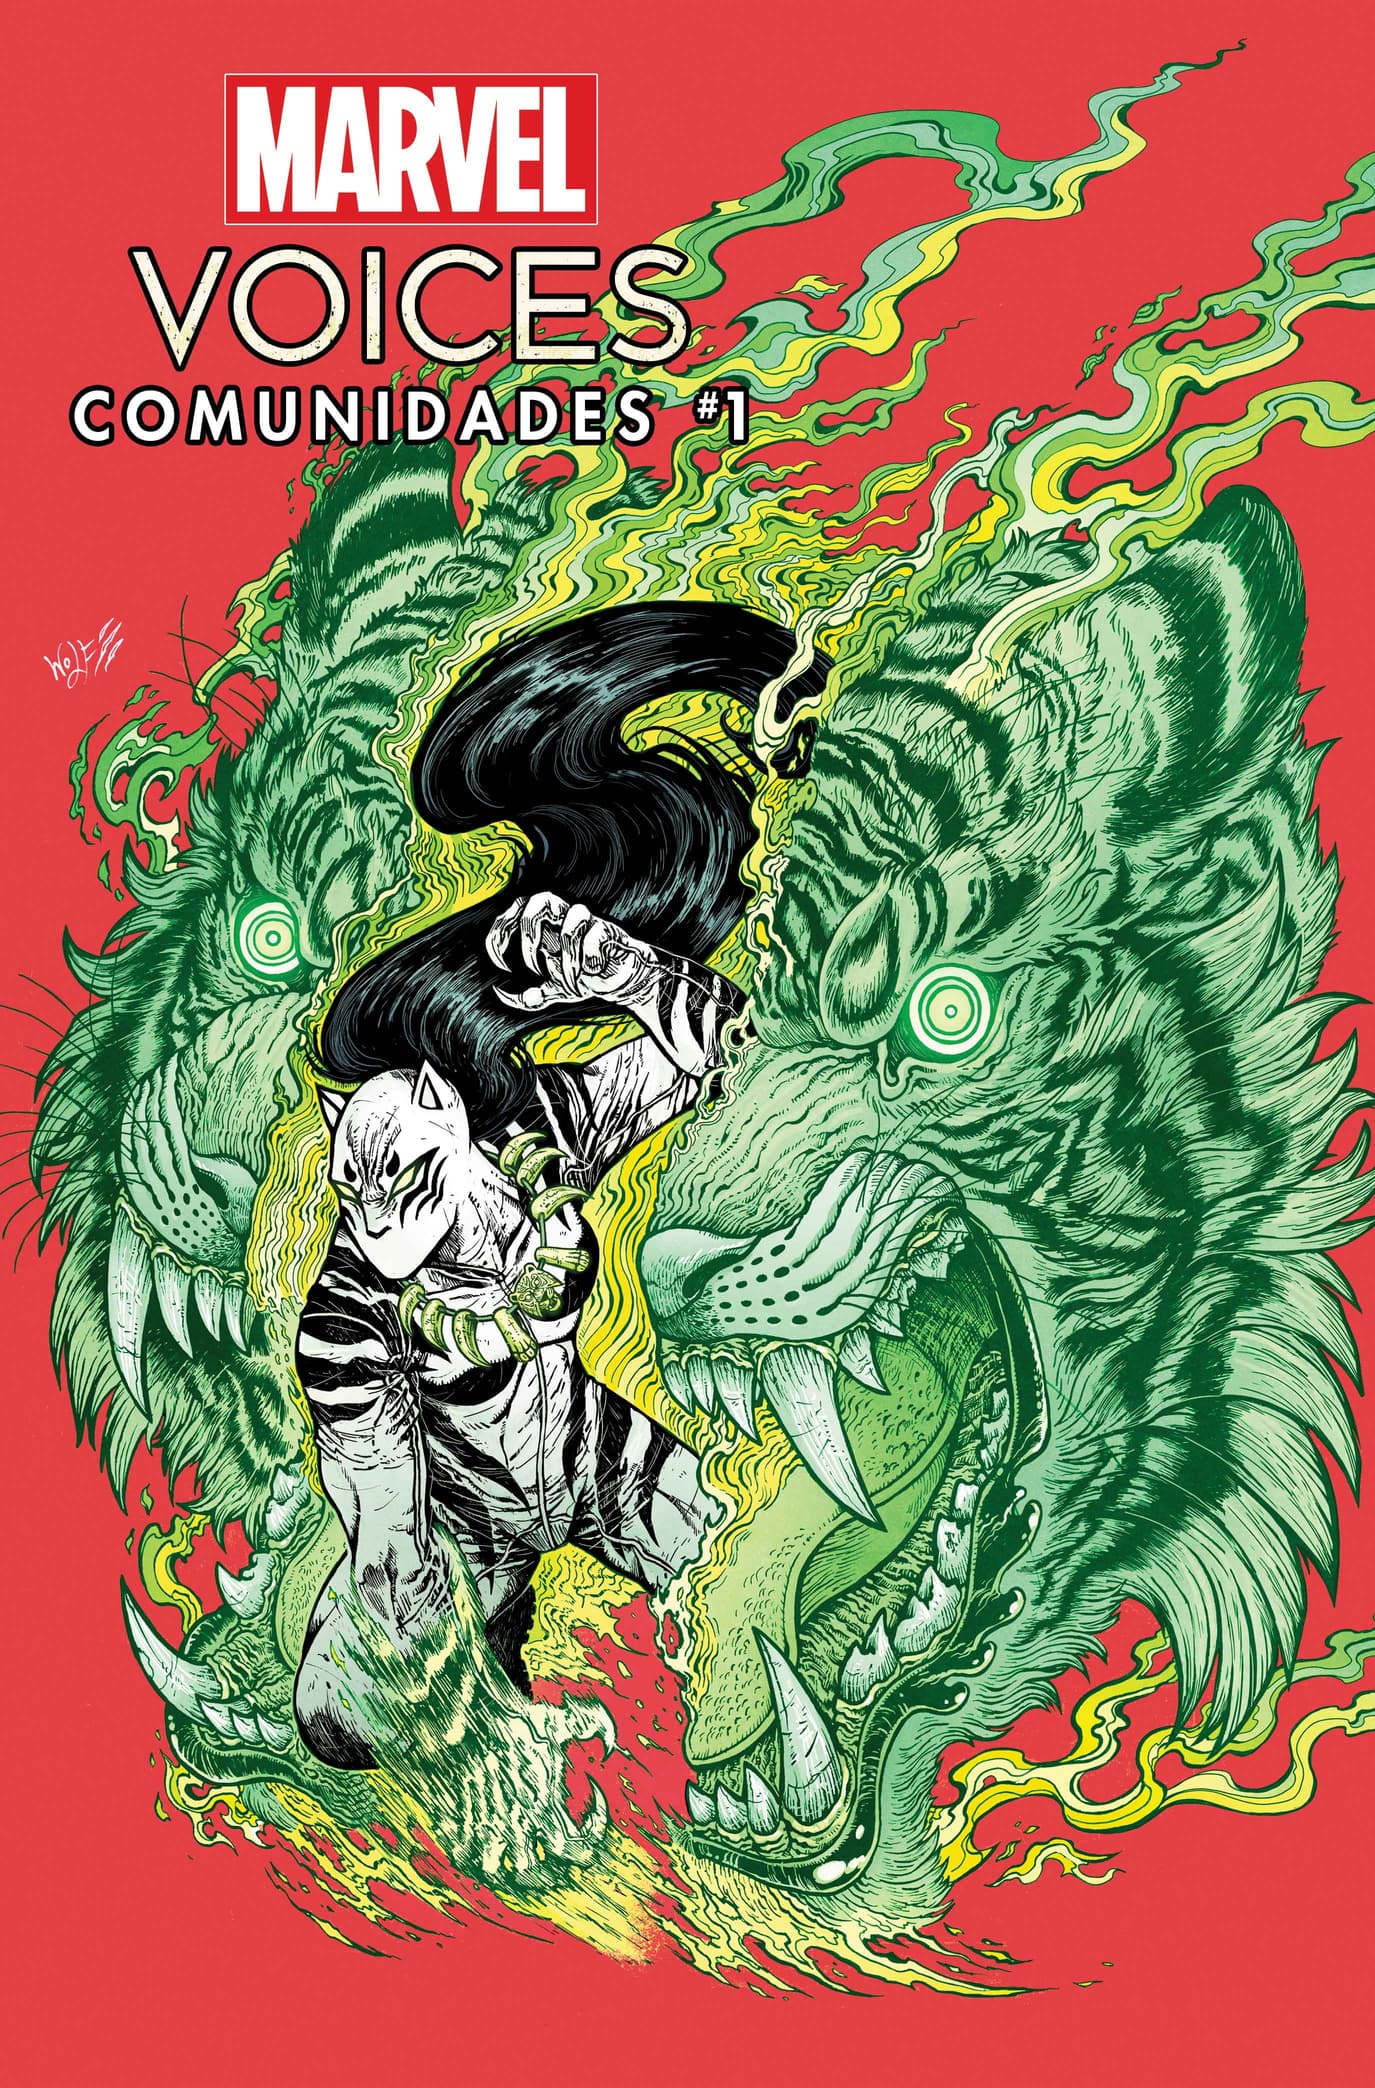 MARVEL'S VOICES: COMUNIDADES #1 Variant Cover by Maria Wolf & Mike Spicer